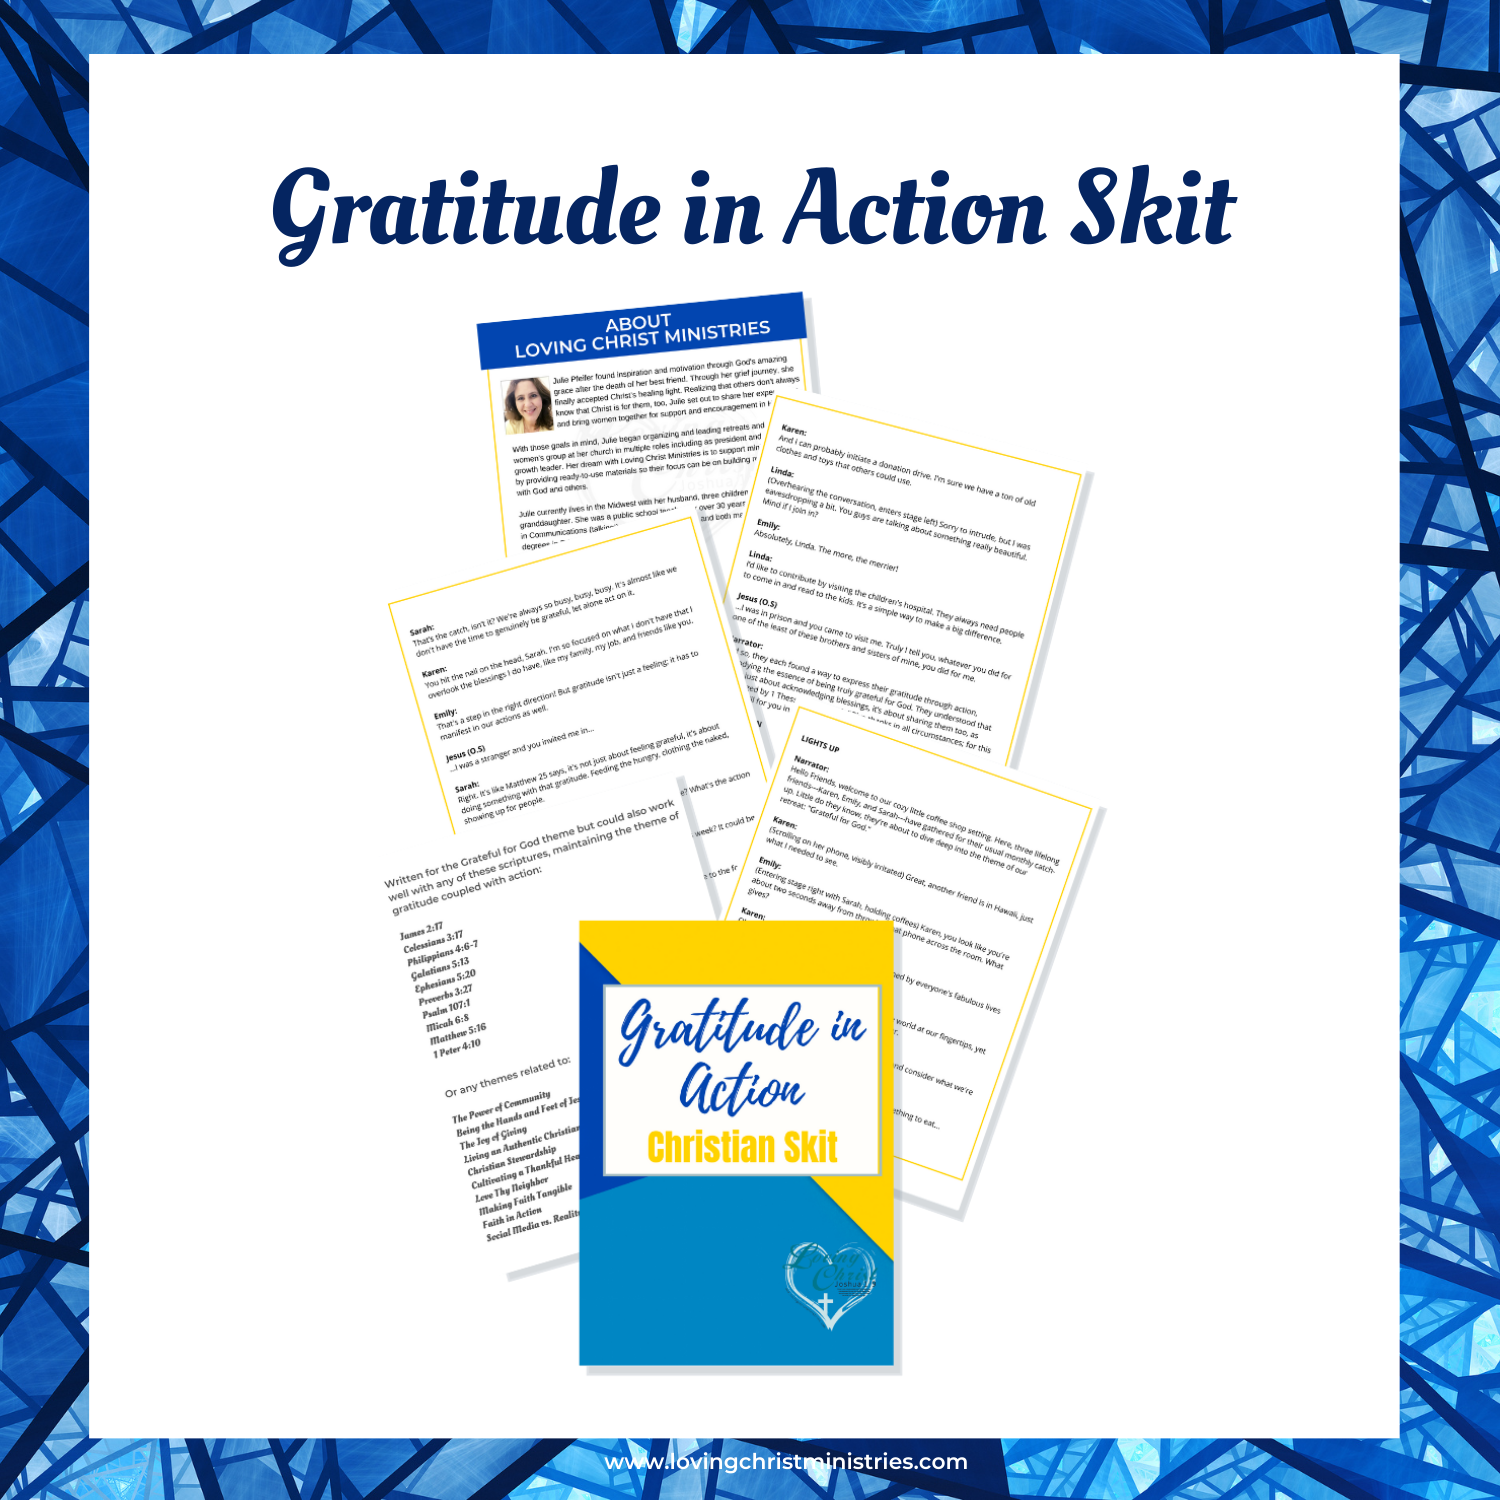 Collection of Grateful for God Theme Resources